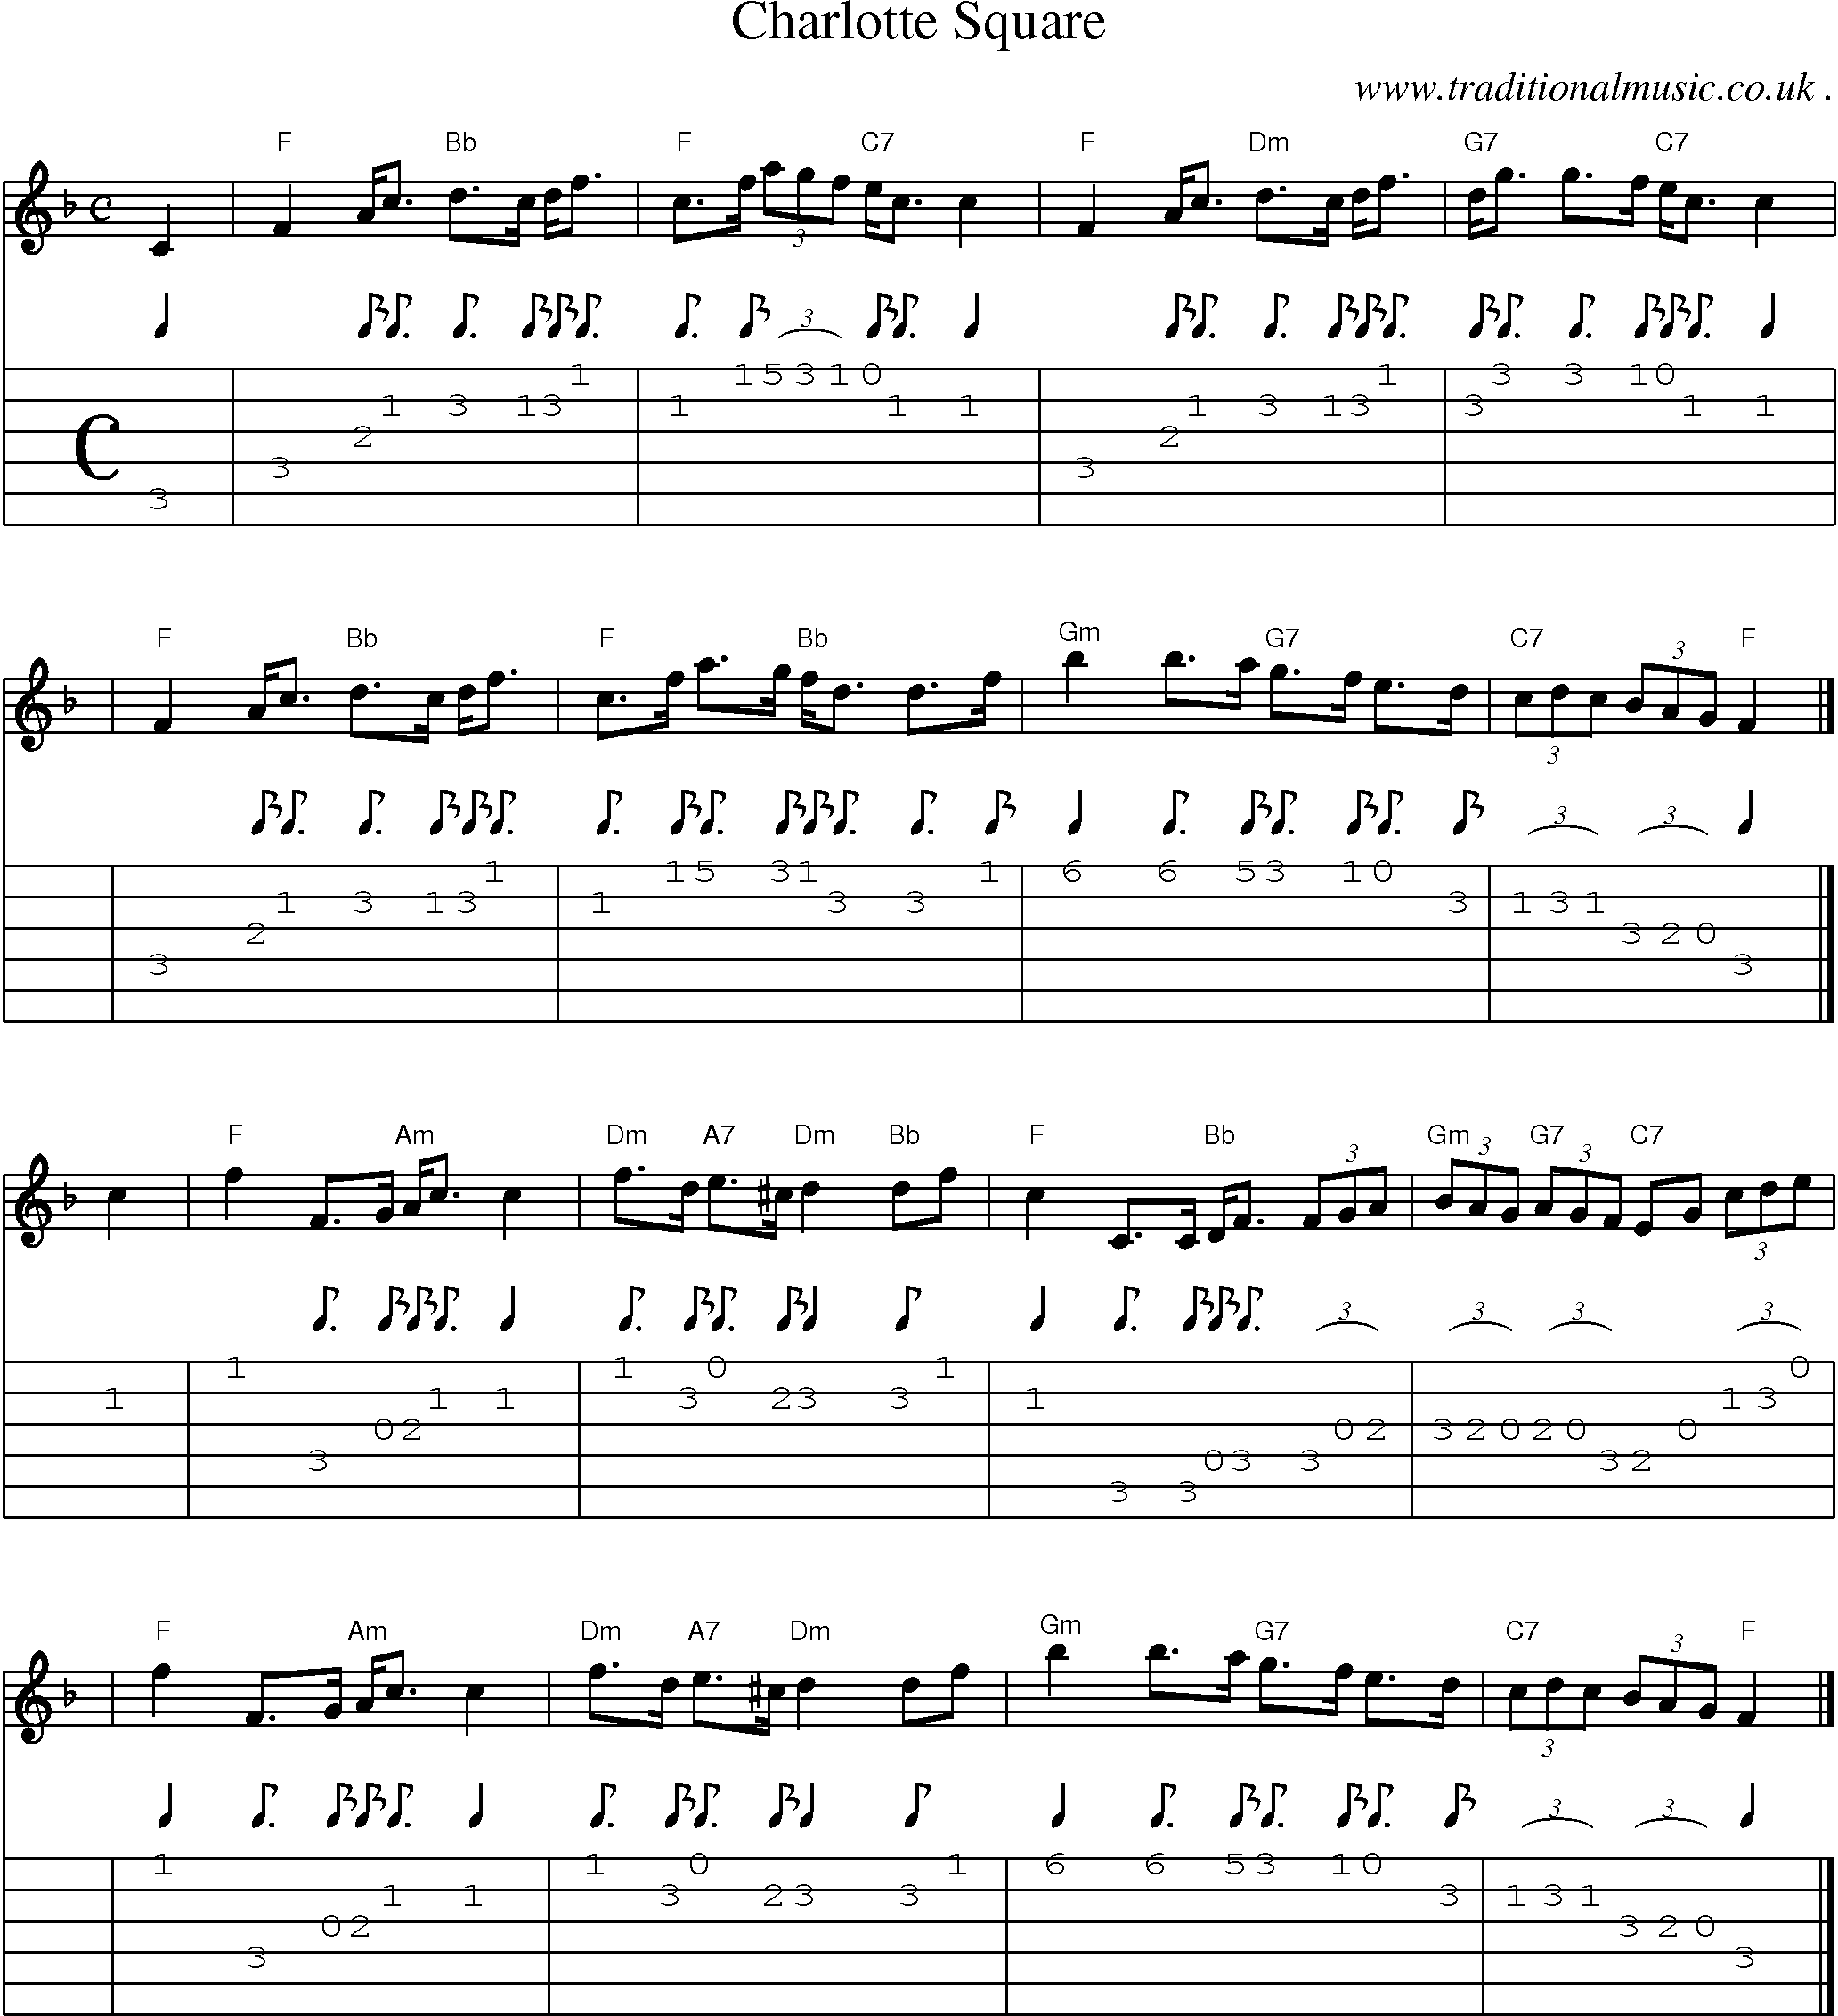 Sheet-music  score, Chords and Guitar Tabs for Charlotte Square